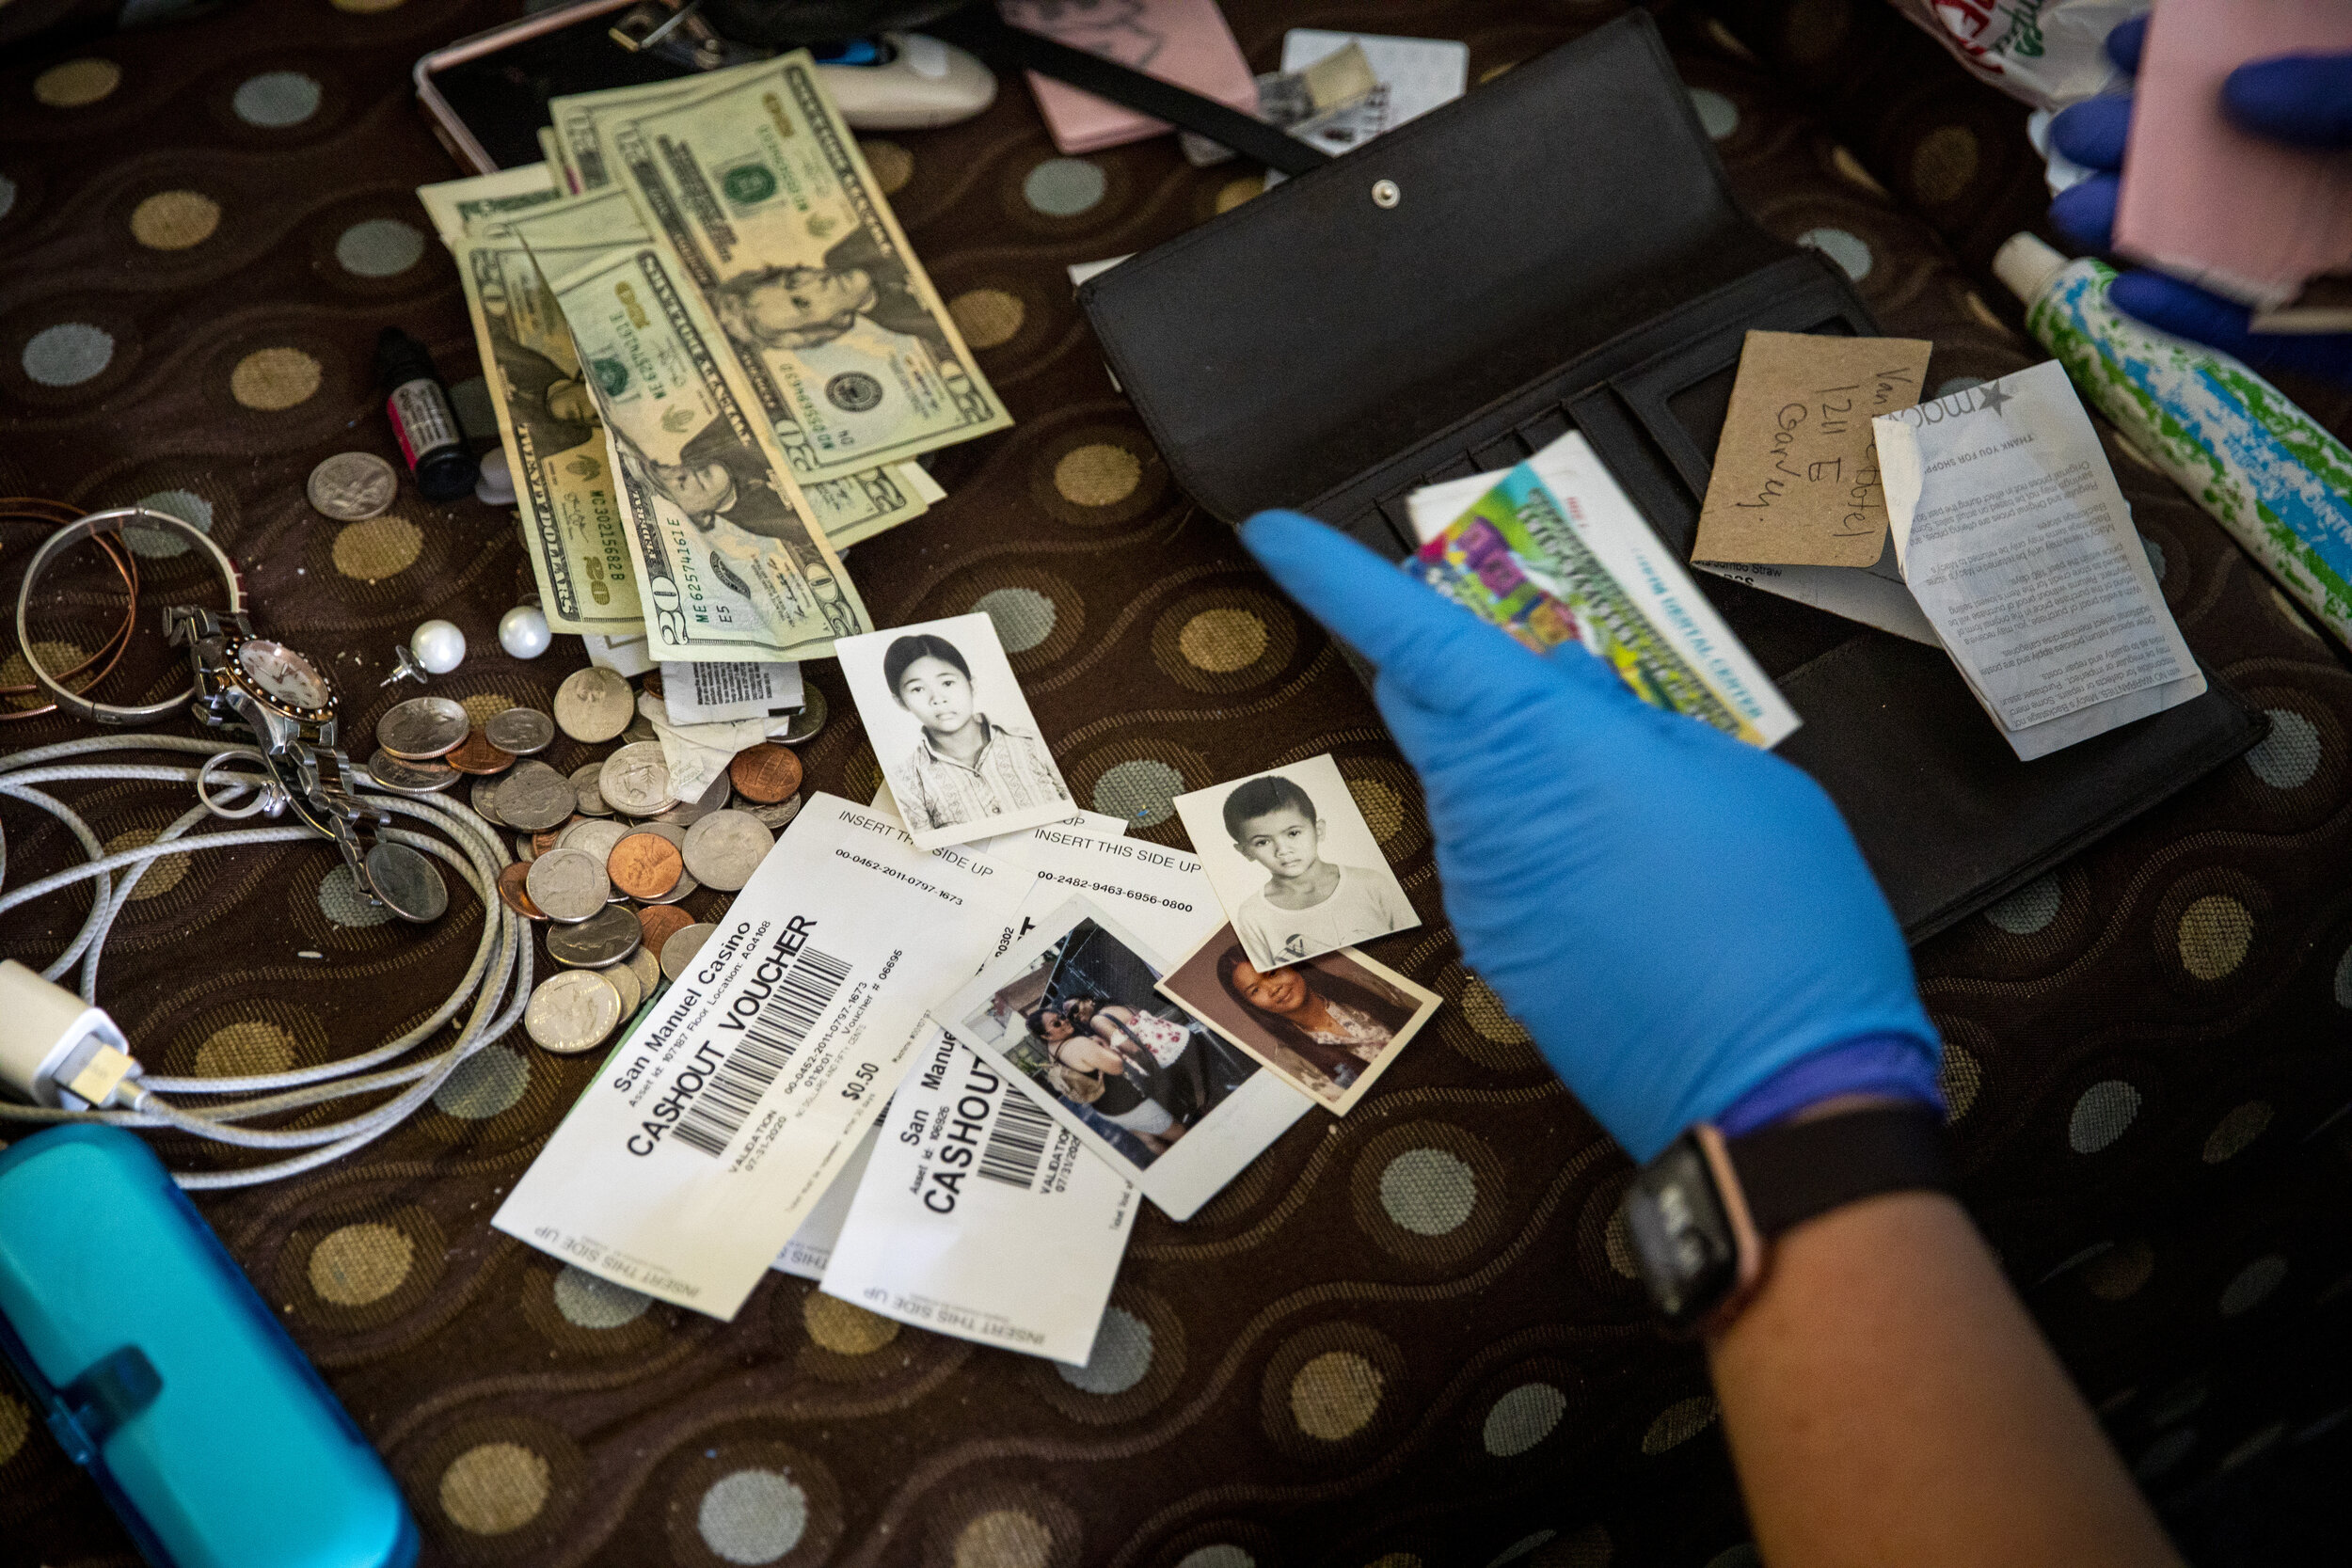  Kristina McGuire, an investigator with the Los Angeles County Dept. of Medical Examiner-Coroner, combs through belongings, looking for clues about the life of a deceased Judy Bounthong, 58, an ob-gyn tech, found dead in her room at the Days Inn by W